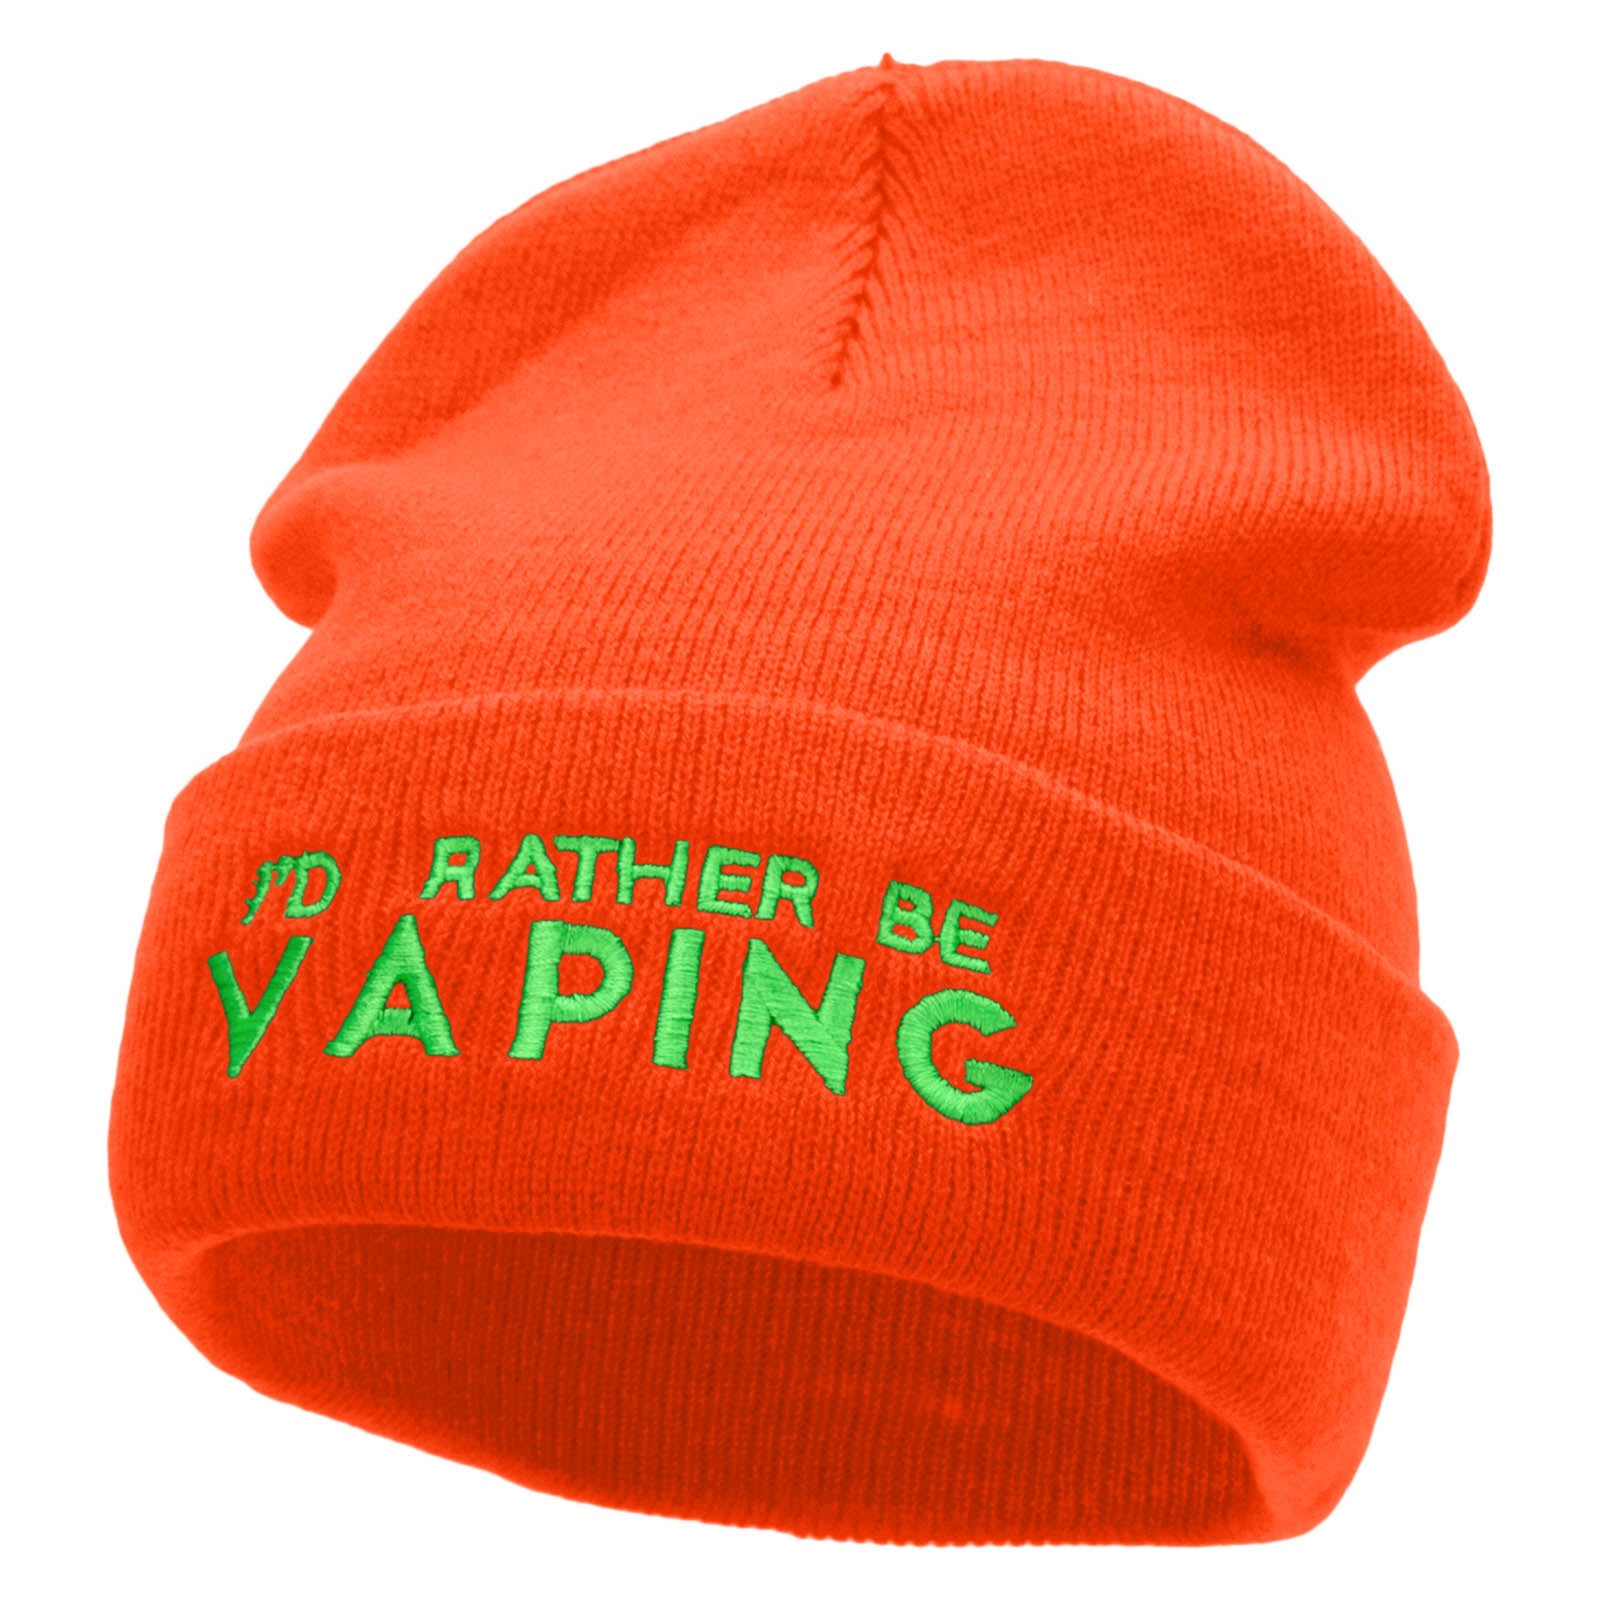 I&#039;d Rather Be Vaping Phrase Embroidered 12 Inch Long Knitted Beanie - Orange OSFM